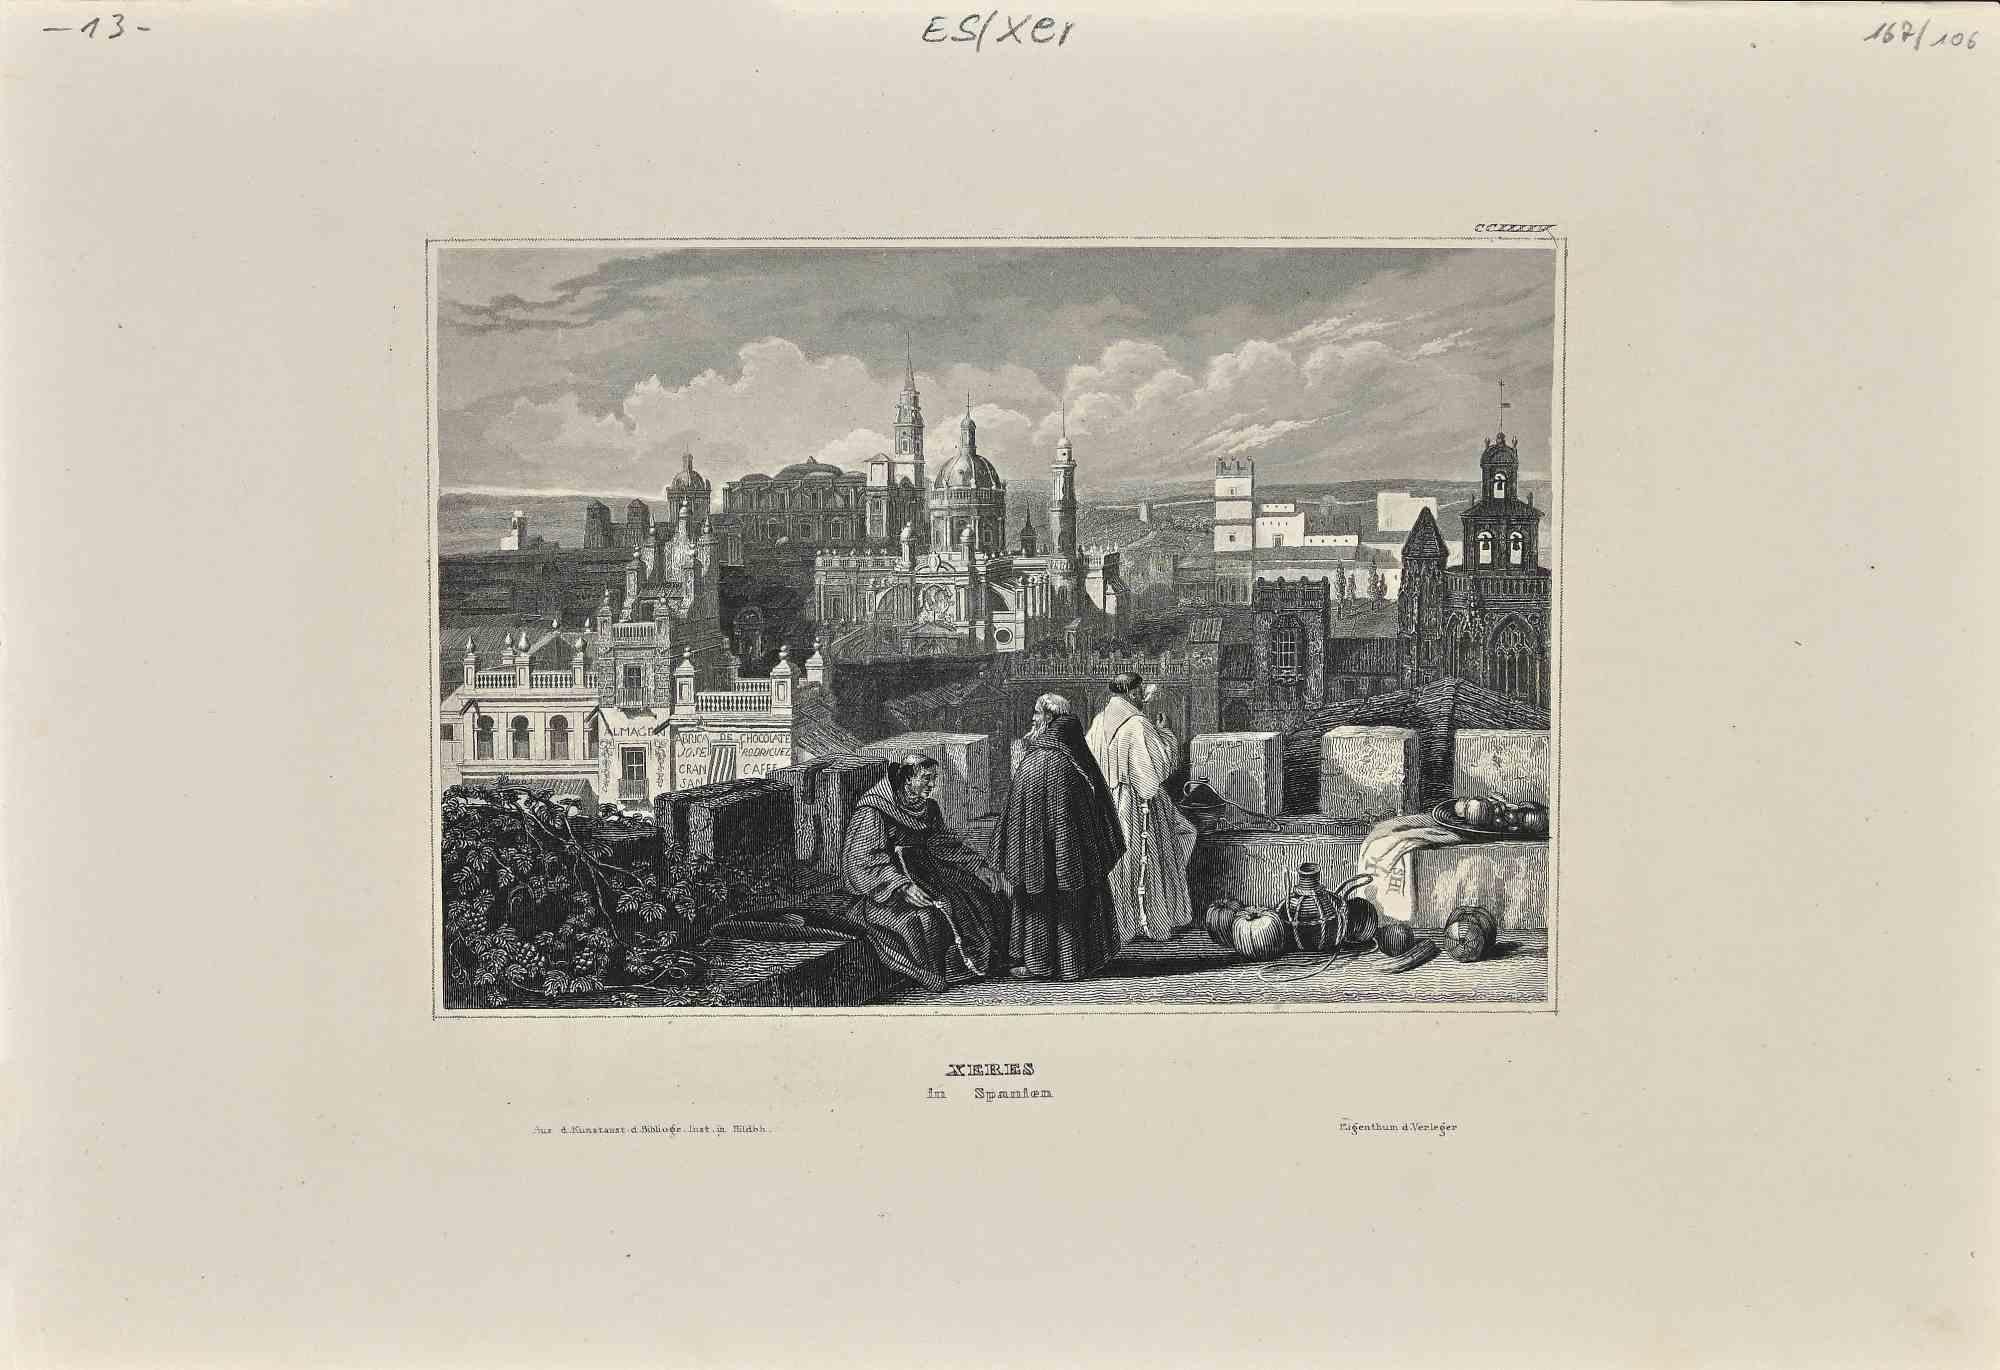 The View of Xeres in Spain is an original lithograph on paper realized by Eigenthum d. Verleger in The 19th Century.

Signed on the plate on the lower right corner.

Original lithograph on paper. 

Titled on the lower center.

Passepartout included